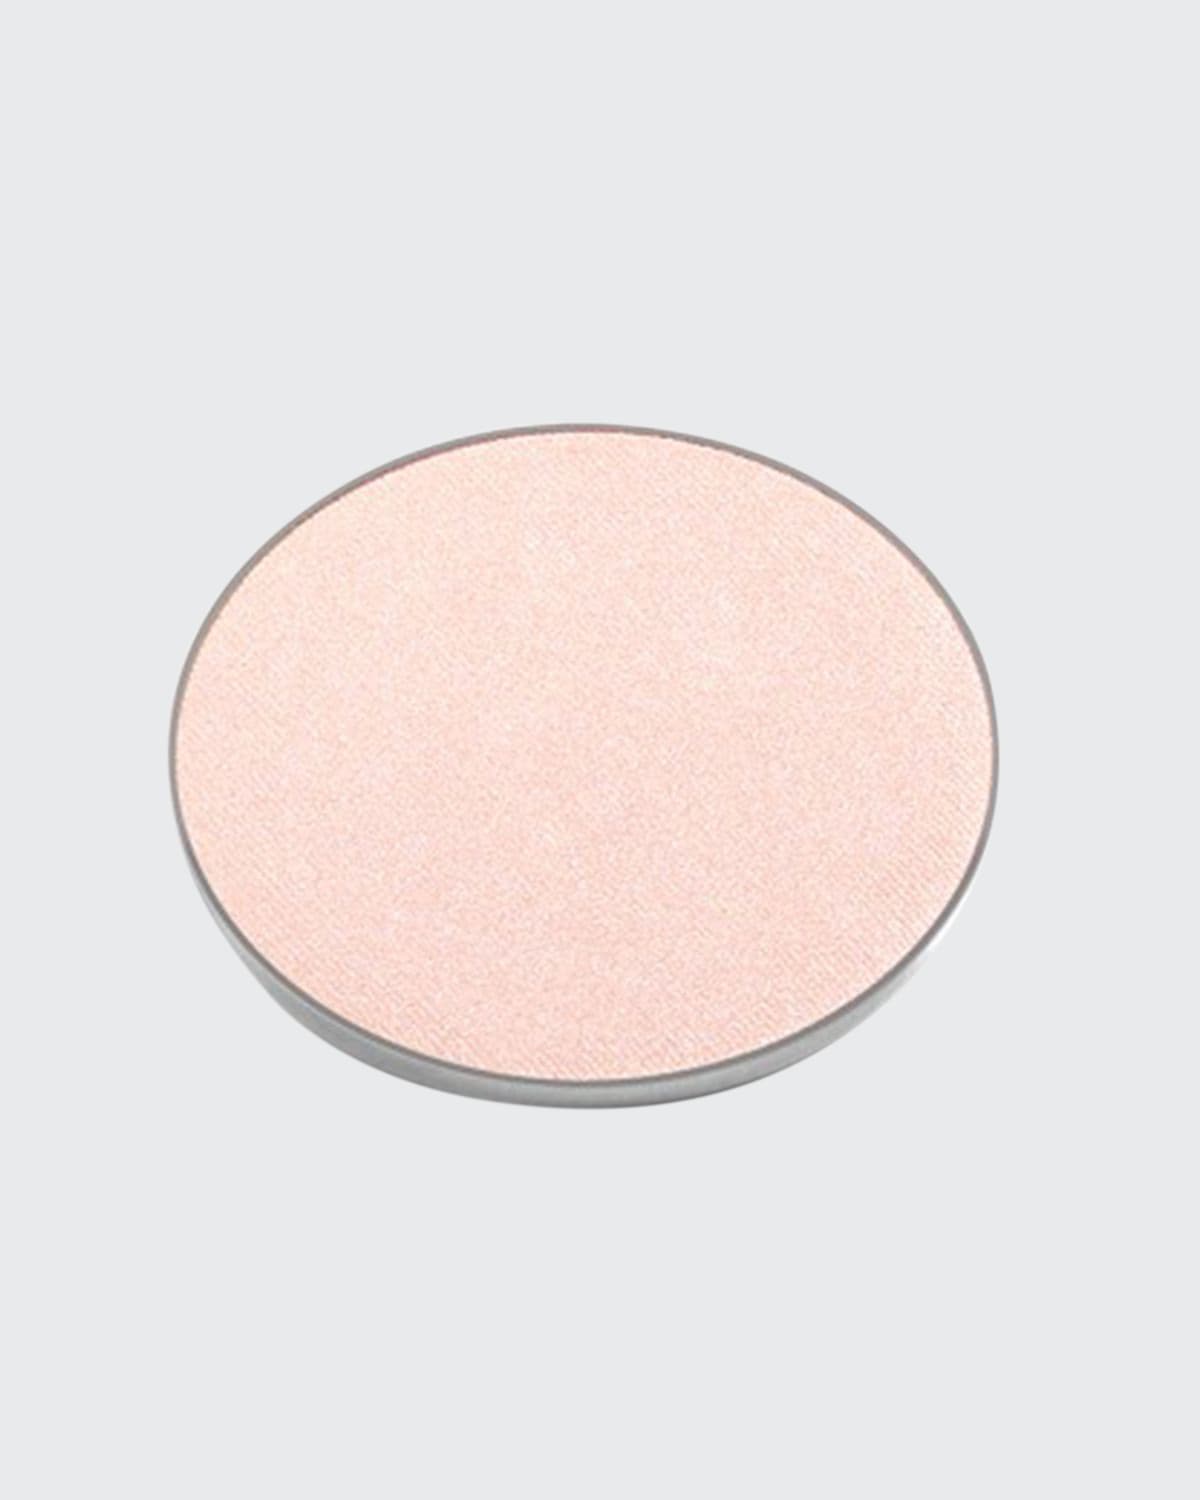 Chantecaille Shine Eyeshadow Palette Refill In Perle